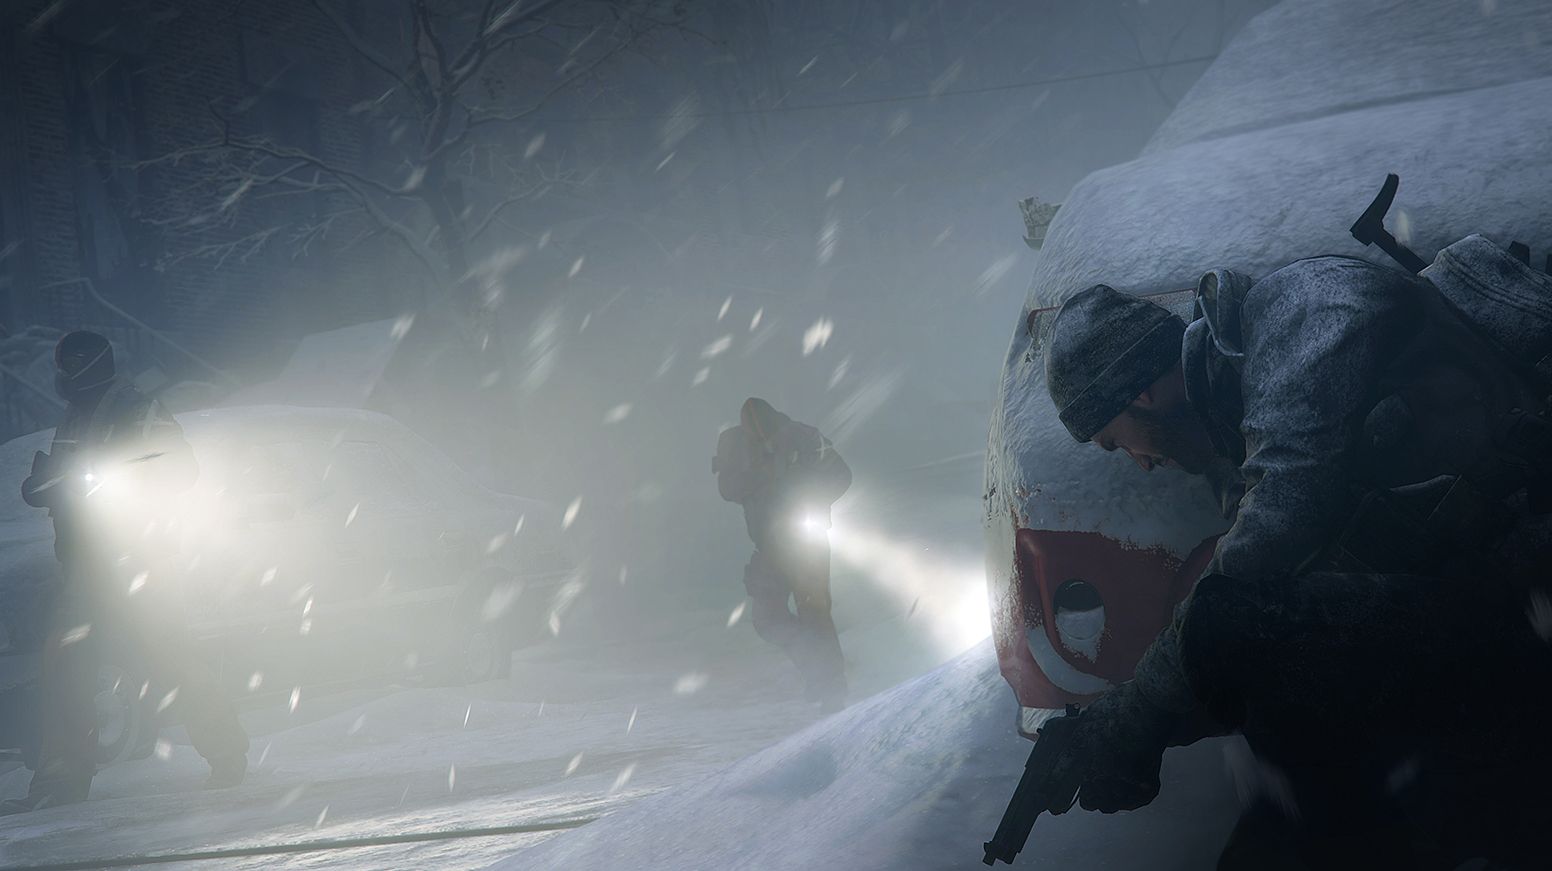 A snowy scene in Tom Clancy's The Division